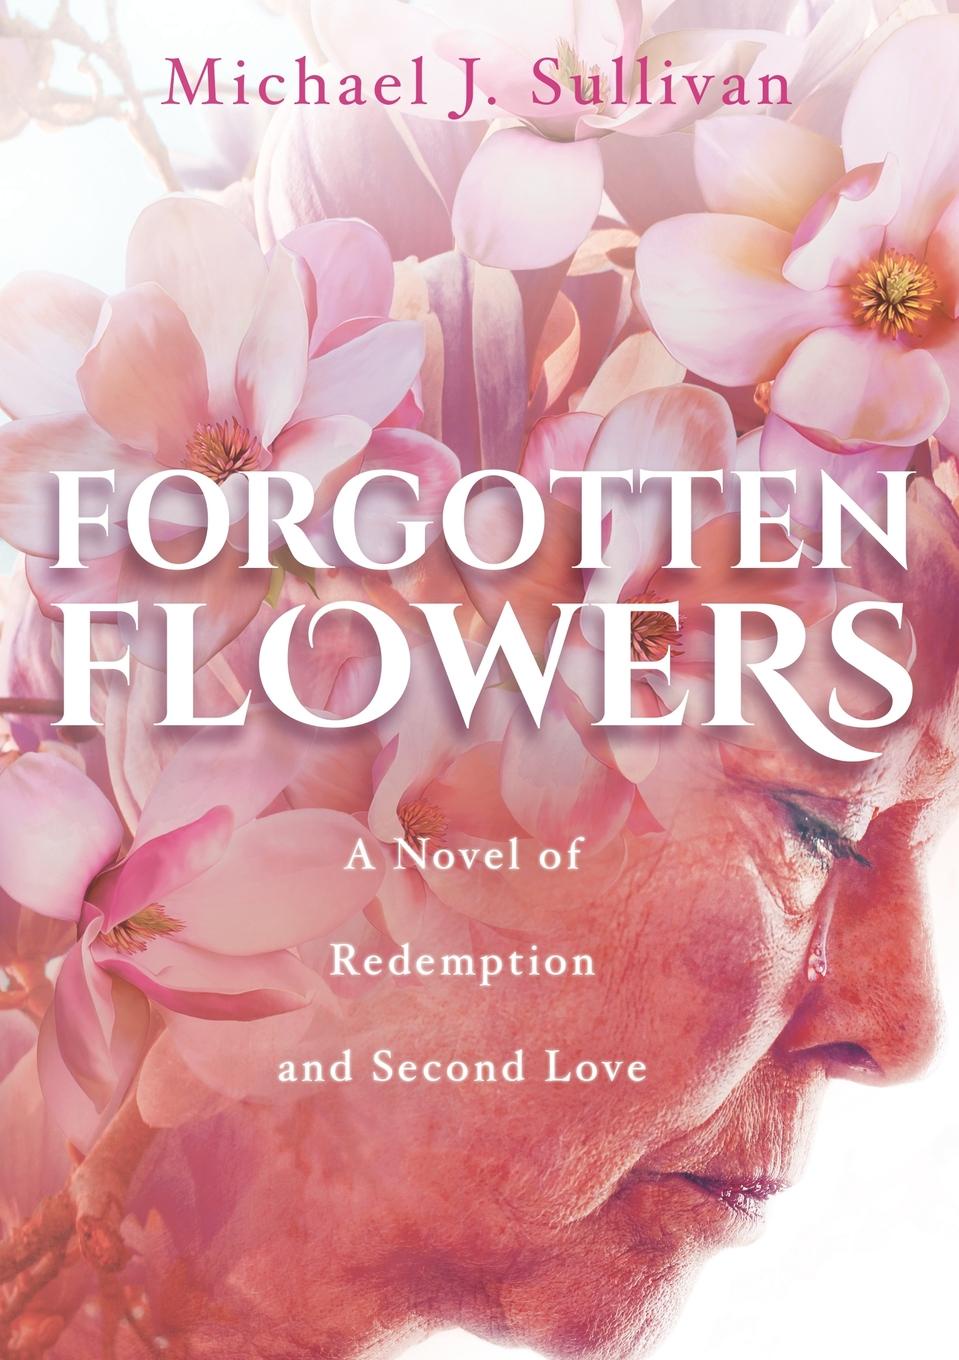 фото Forgotten Flowers. A Novel of Redemption and Second Love